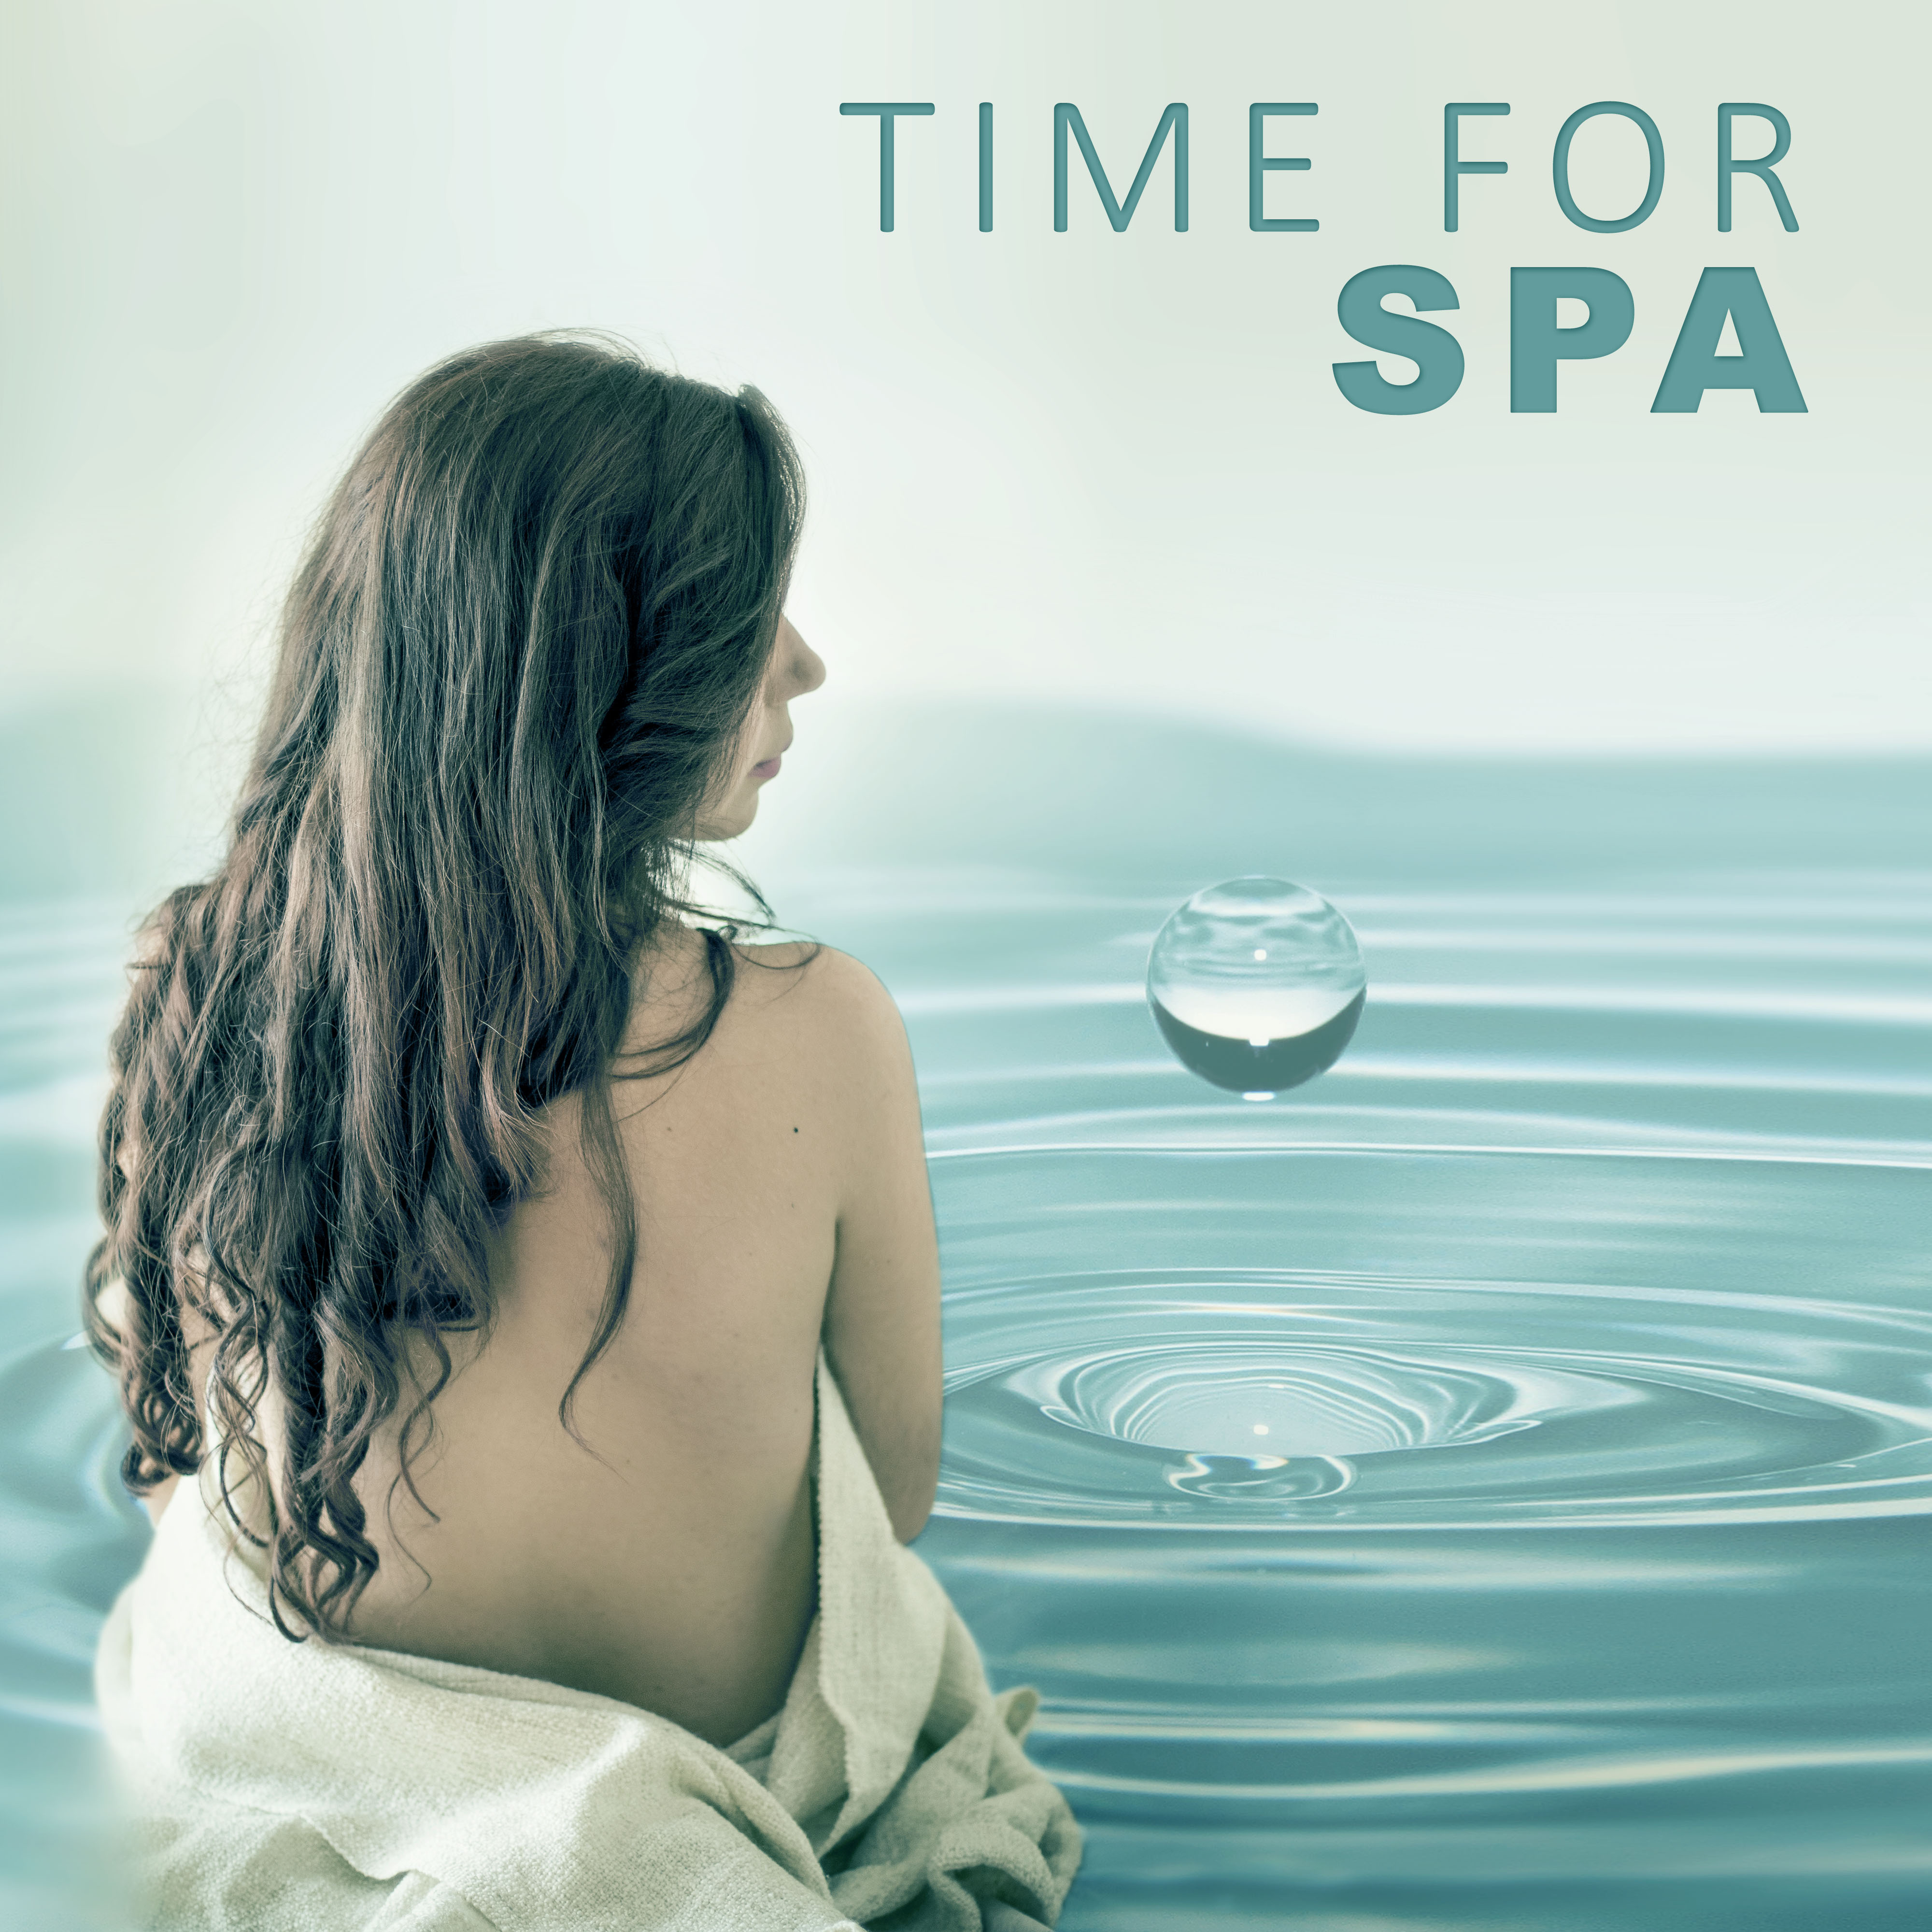 Time for Spa – Beautiful Nature Sounds for Spa Treatments, Reiki Sounds, Feel Inner Peace & Beauty, Deep Relaxing Music